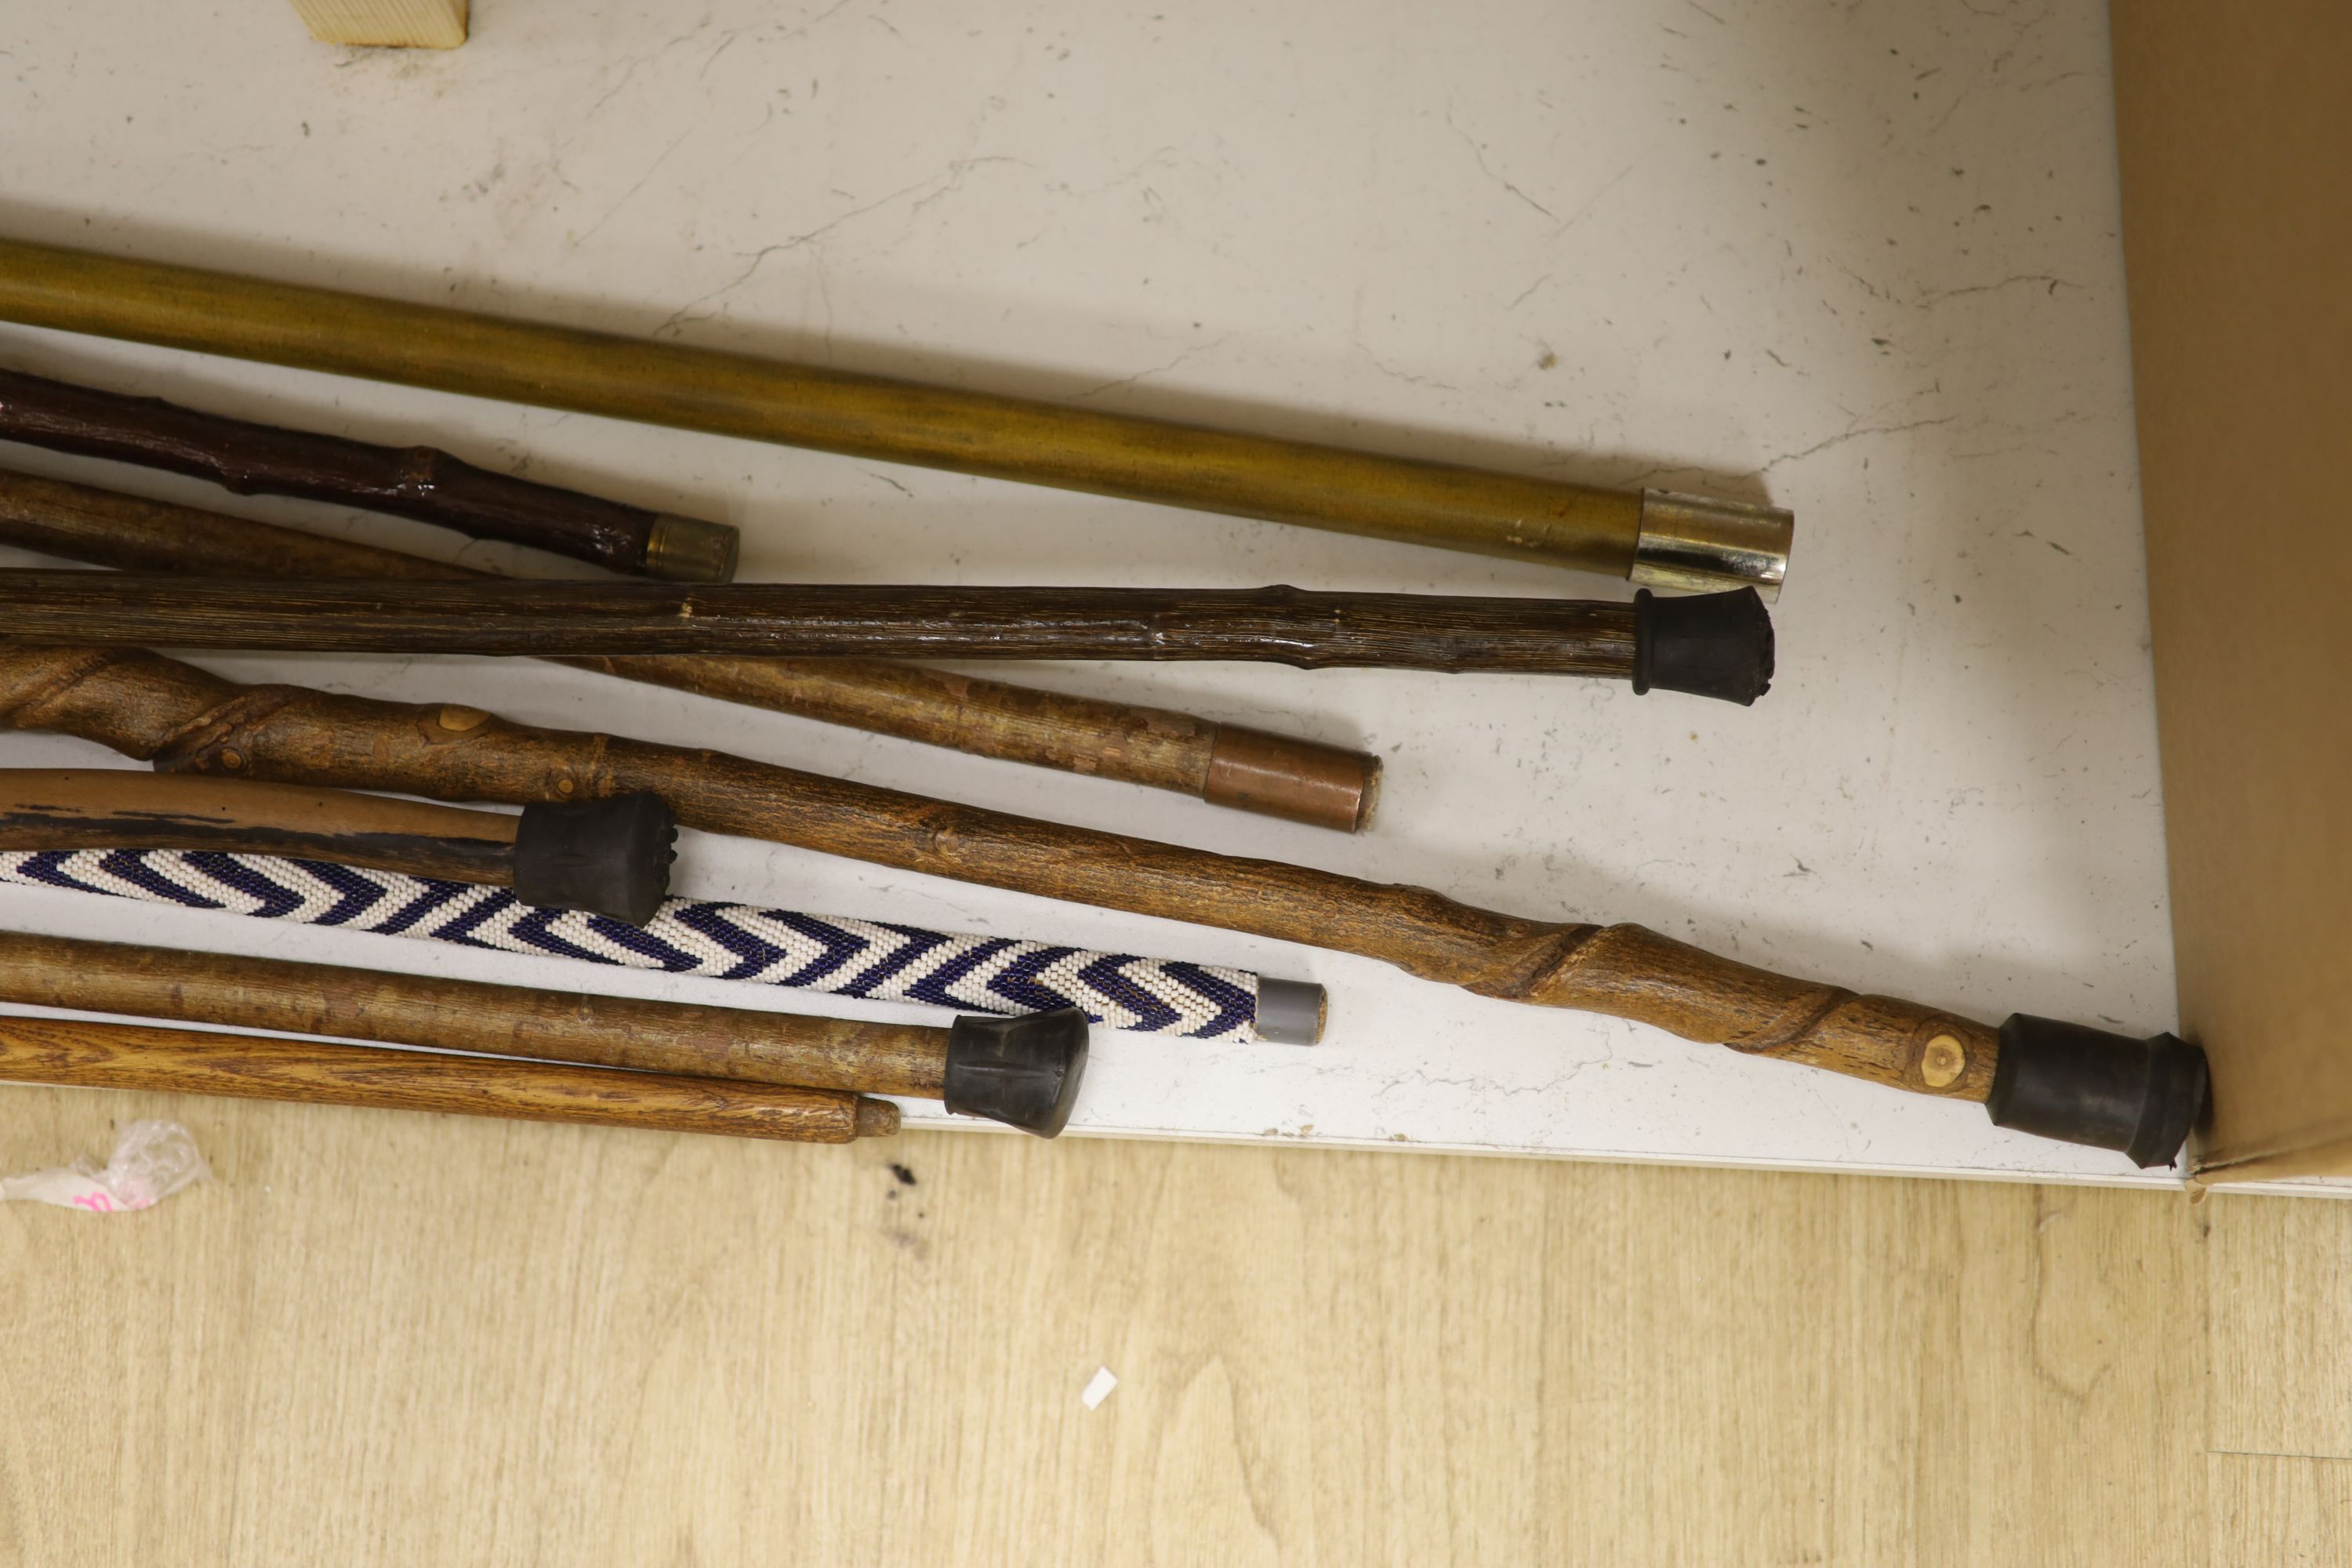 A collection of nine various handled walking sticks